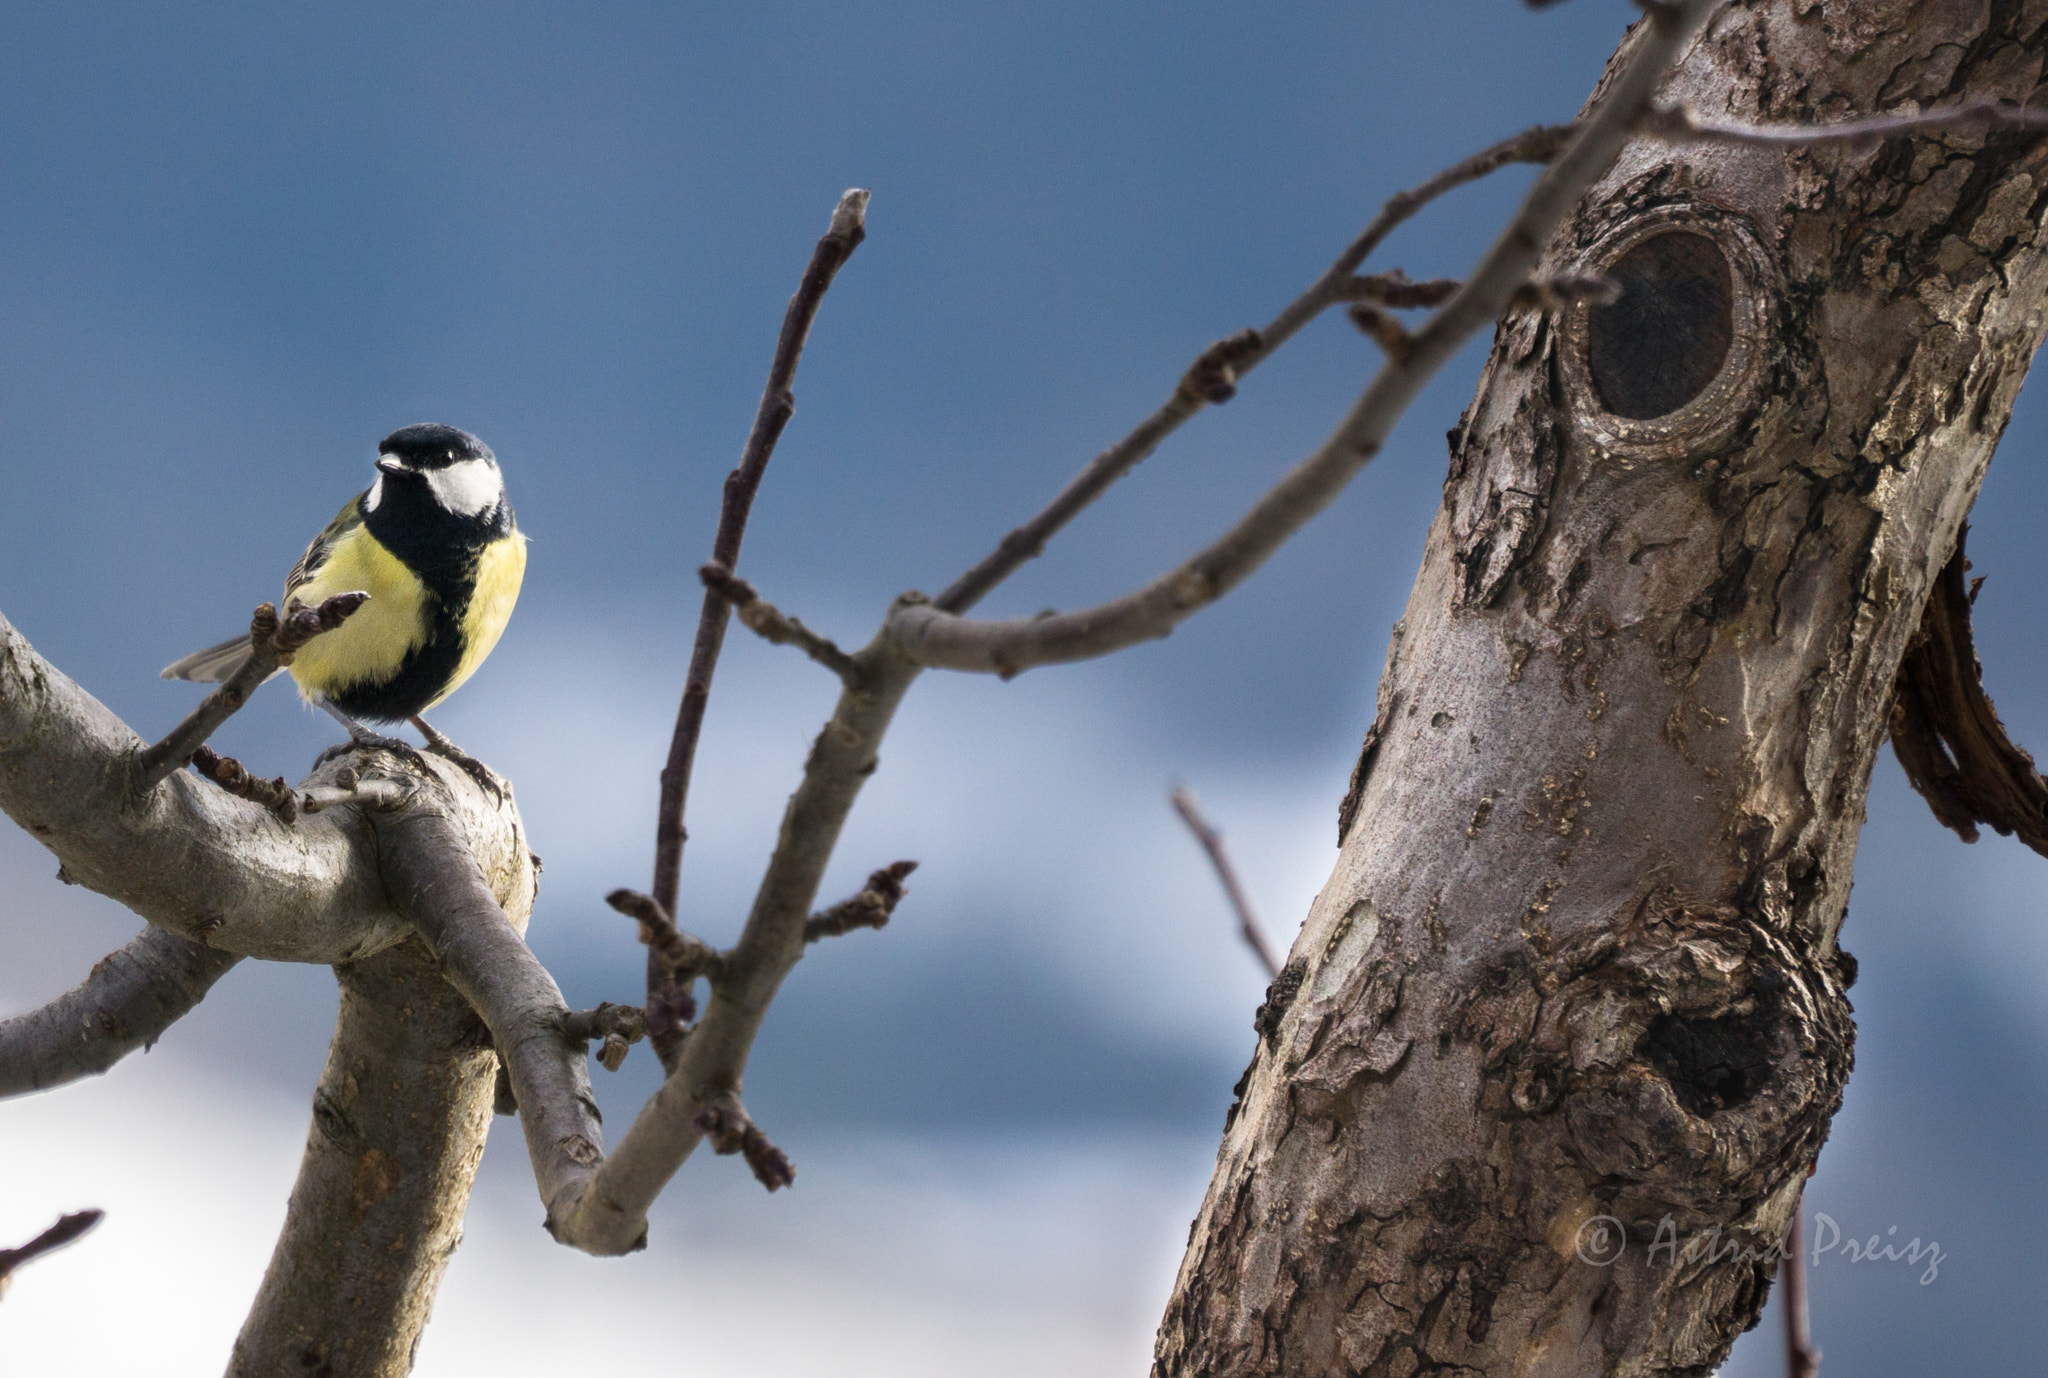 Sony a6000 + Sony FE 70-300mm F4.5-5.6 G OSS sample photo. Great tit in a tree photography